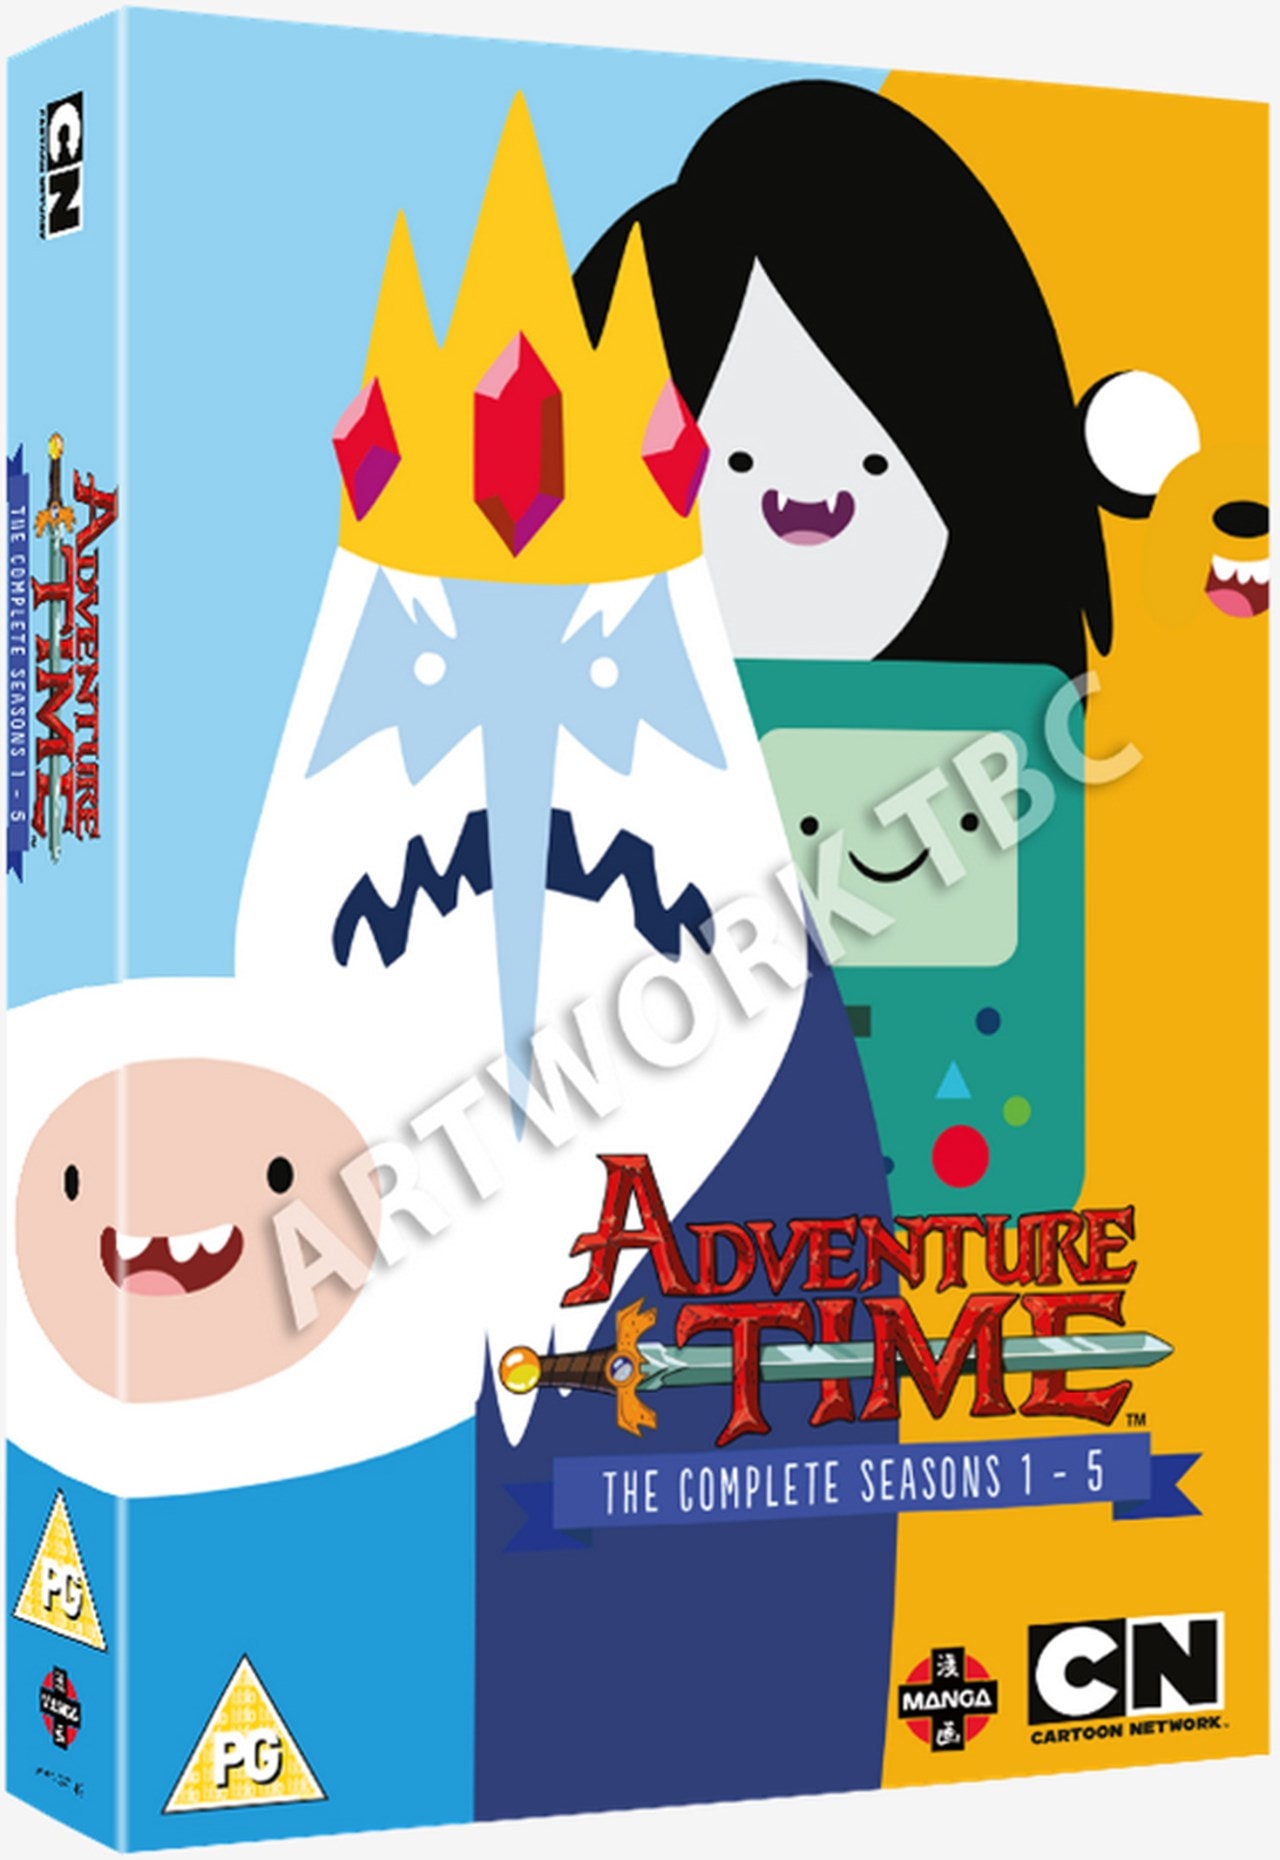 Adventure Time The Complete Seasons 1 5 Dvd Box Set Free Shipping Over Hmv Store